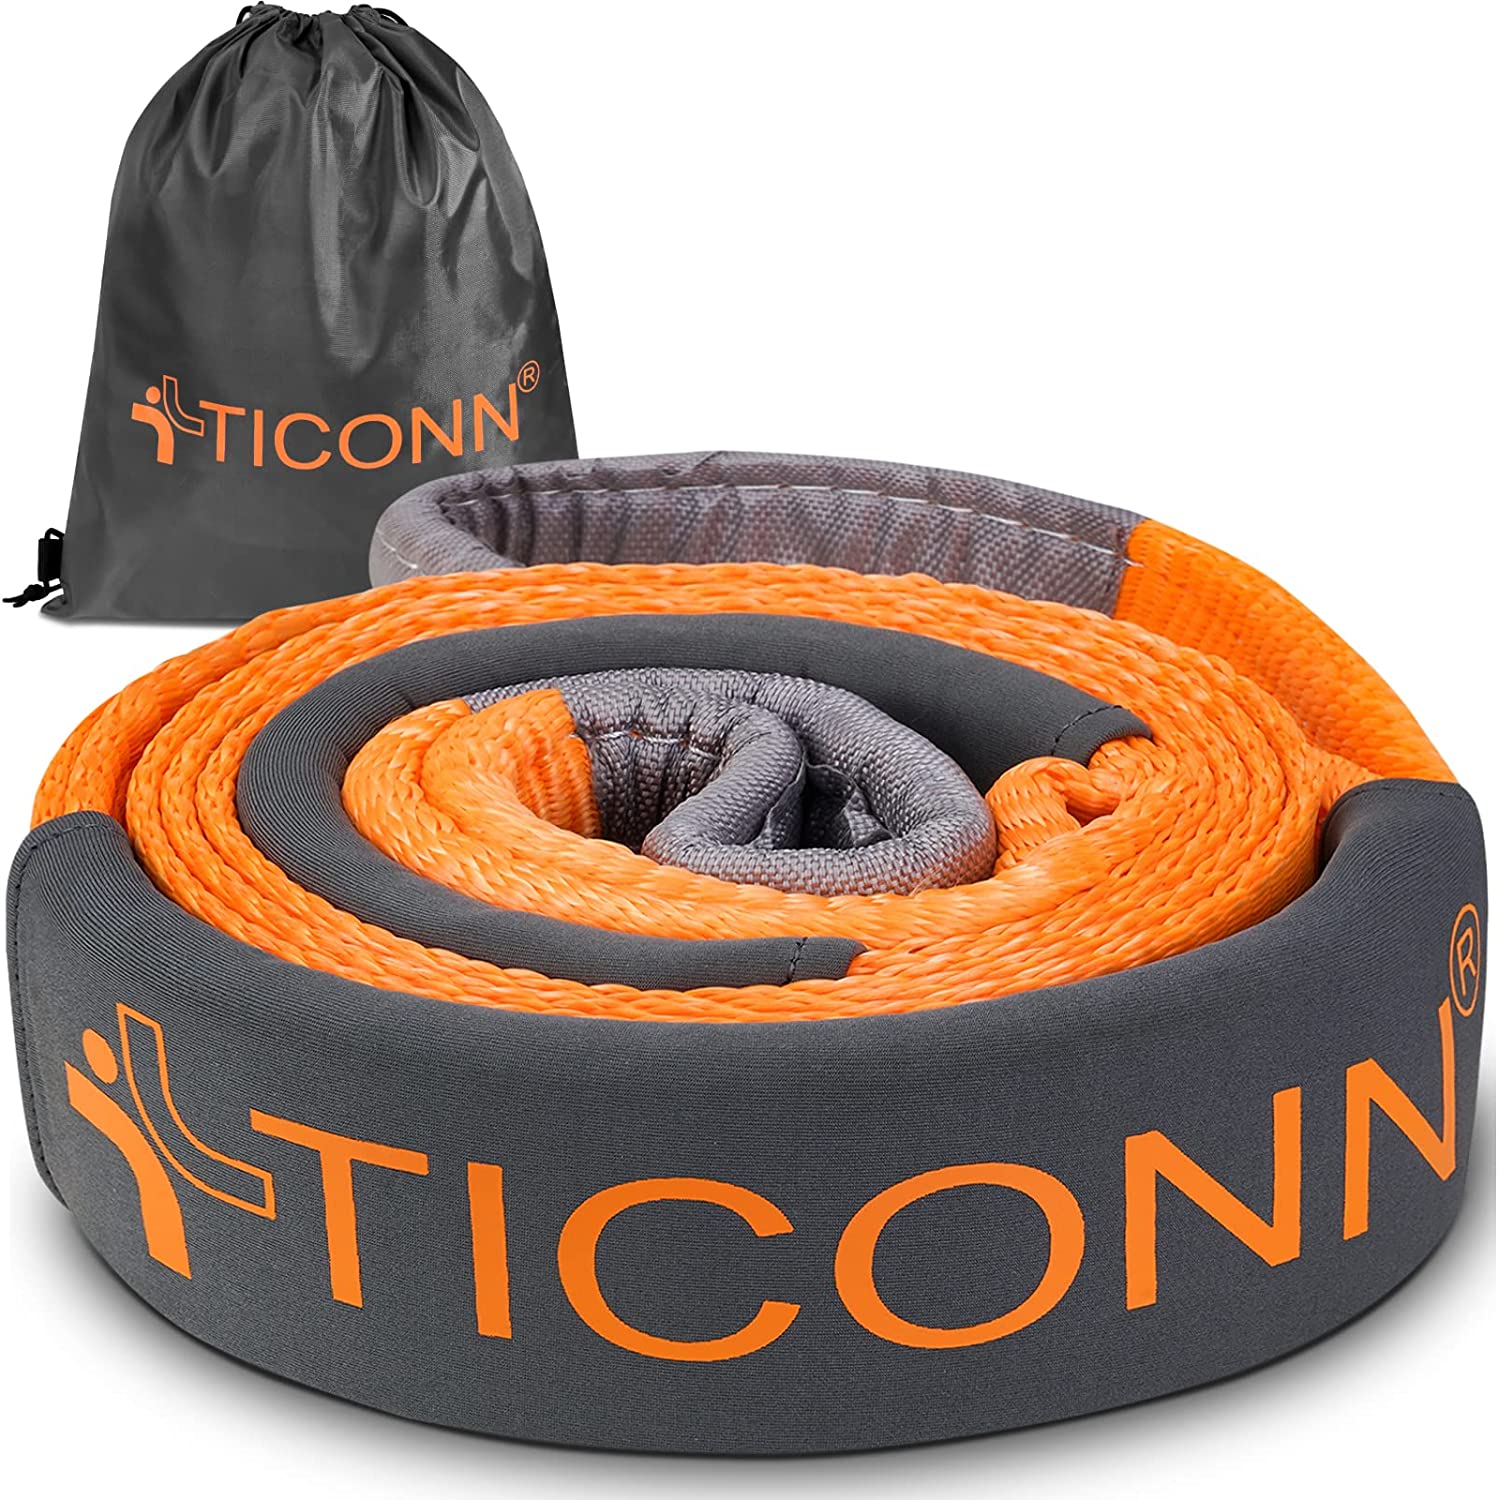 TICONN 20'&30' Recovery Tow Strap and Combos $17.97 to $69.98 + Free Shipping w/ Prime